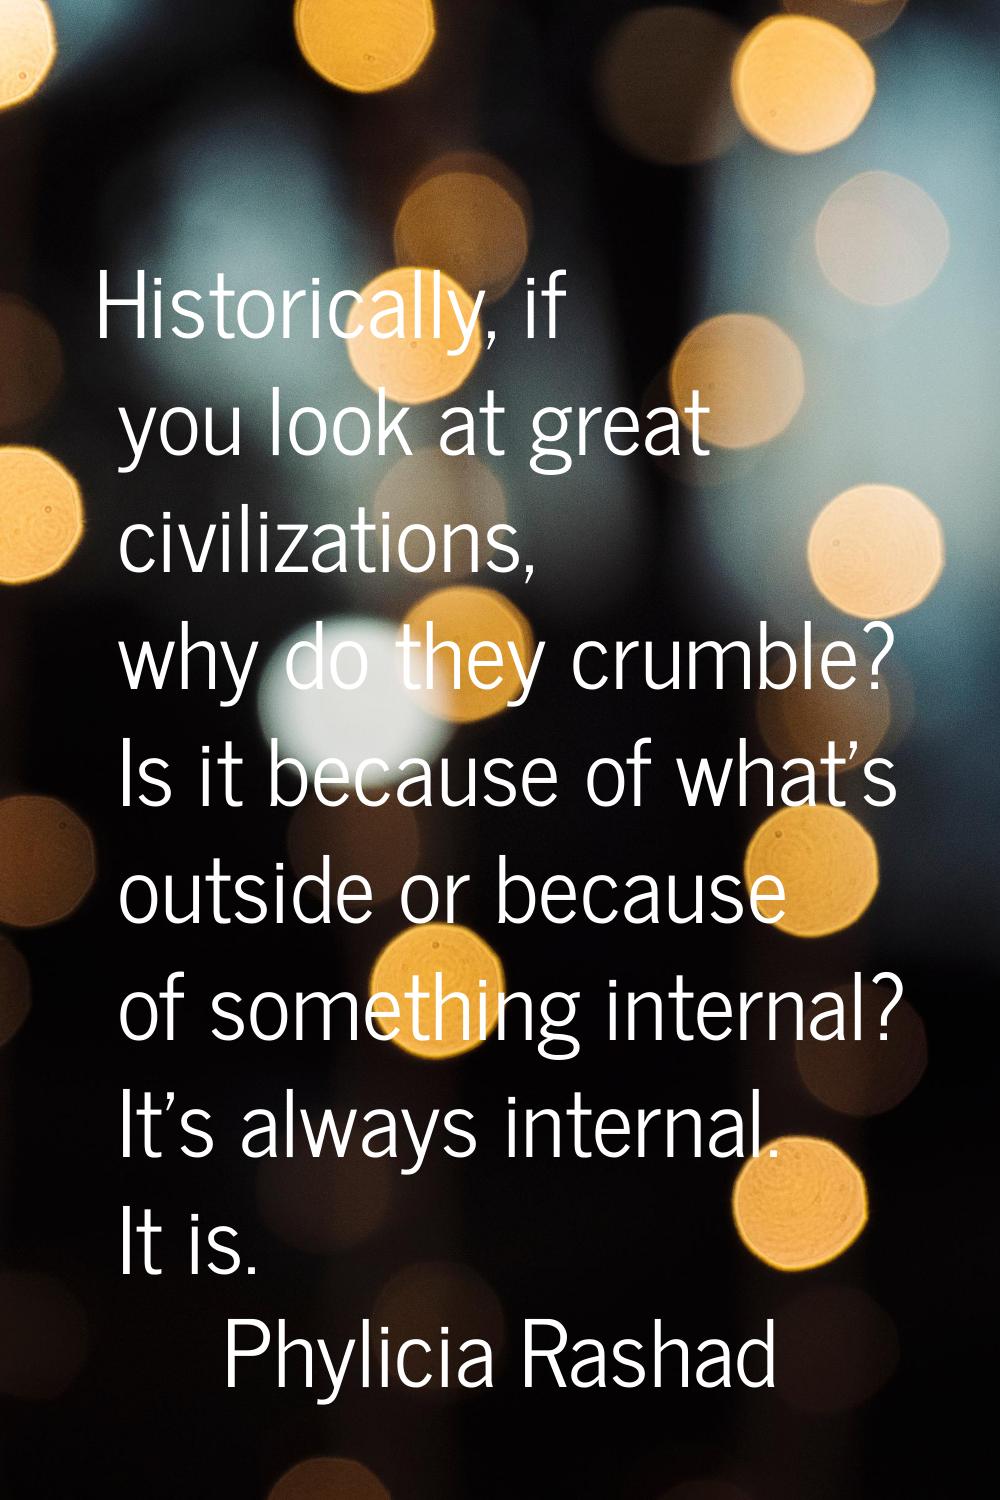 Historically, if you look at great civilizations, why do they crumble? Is it because of what's outs